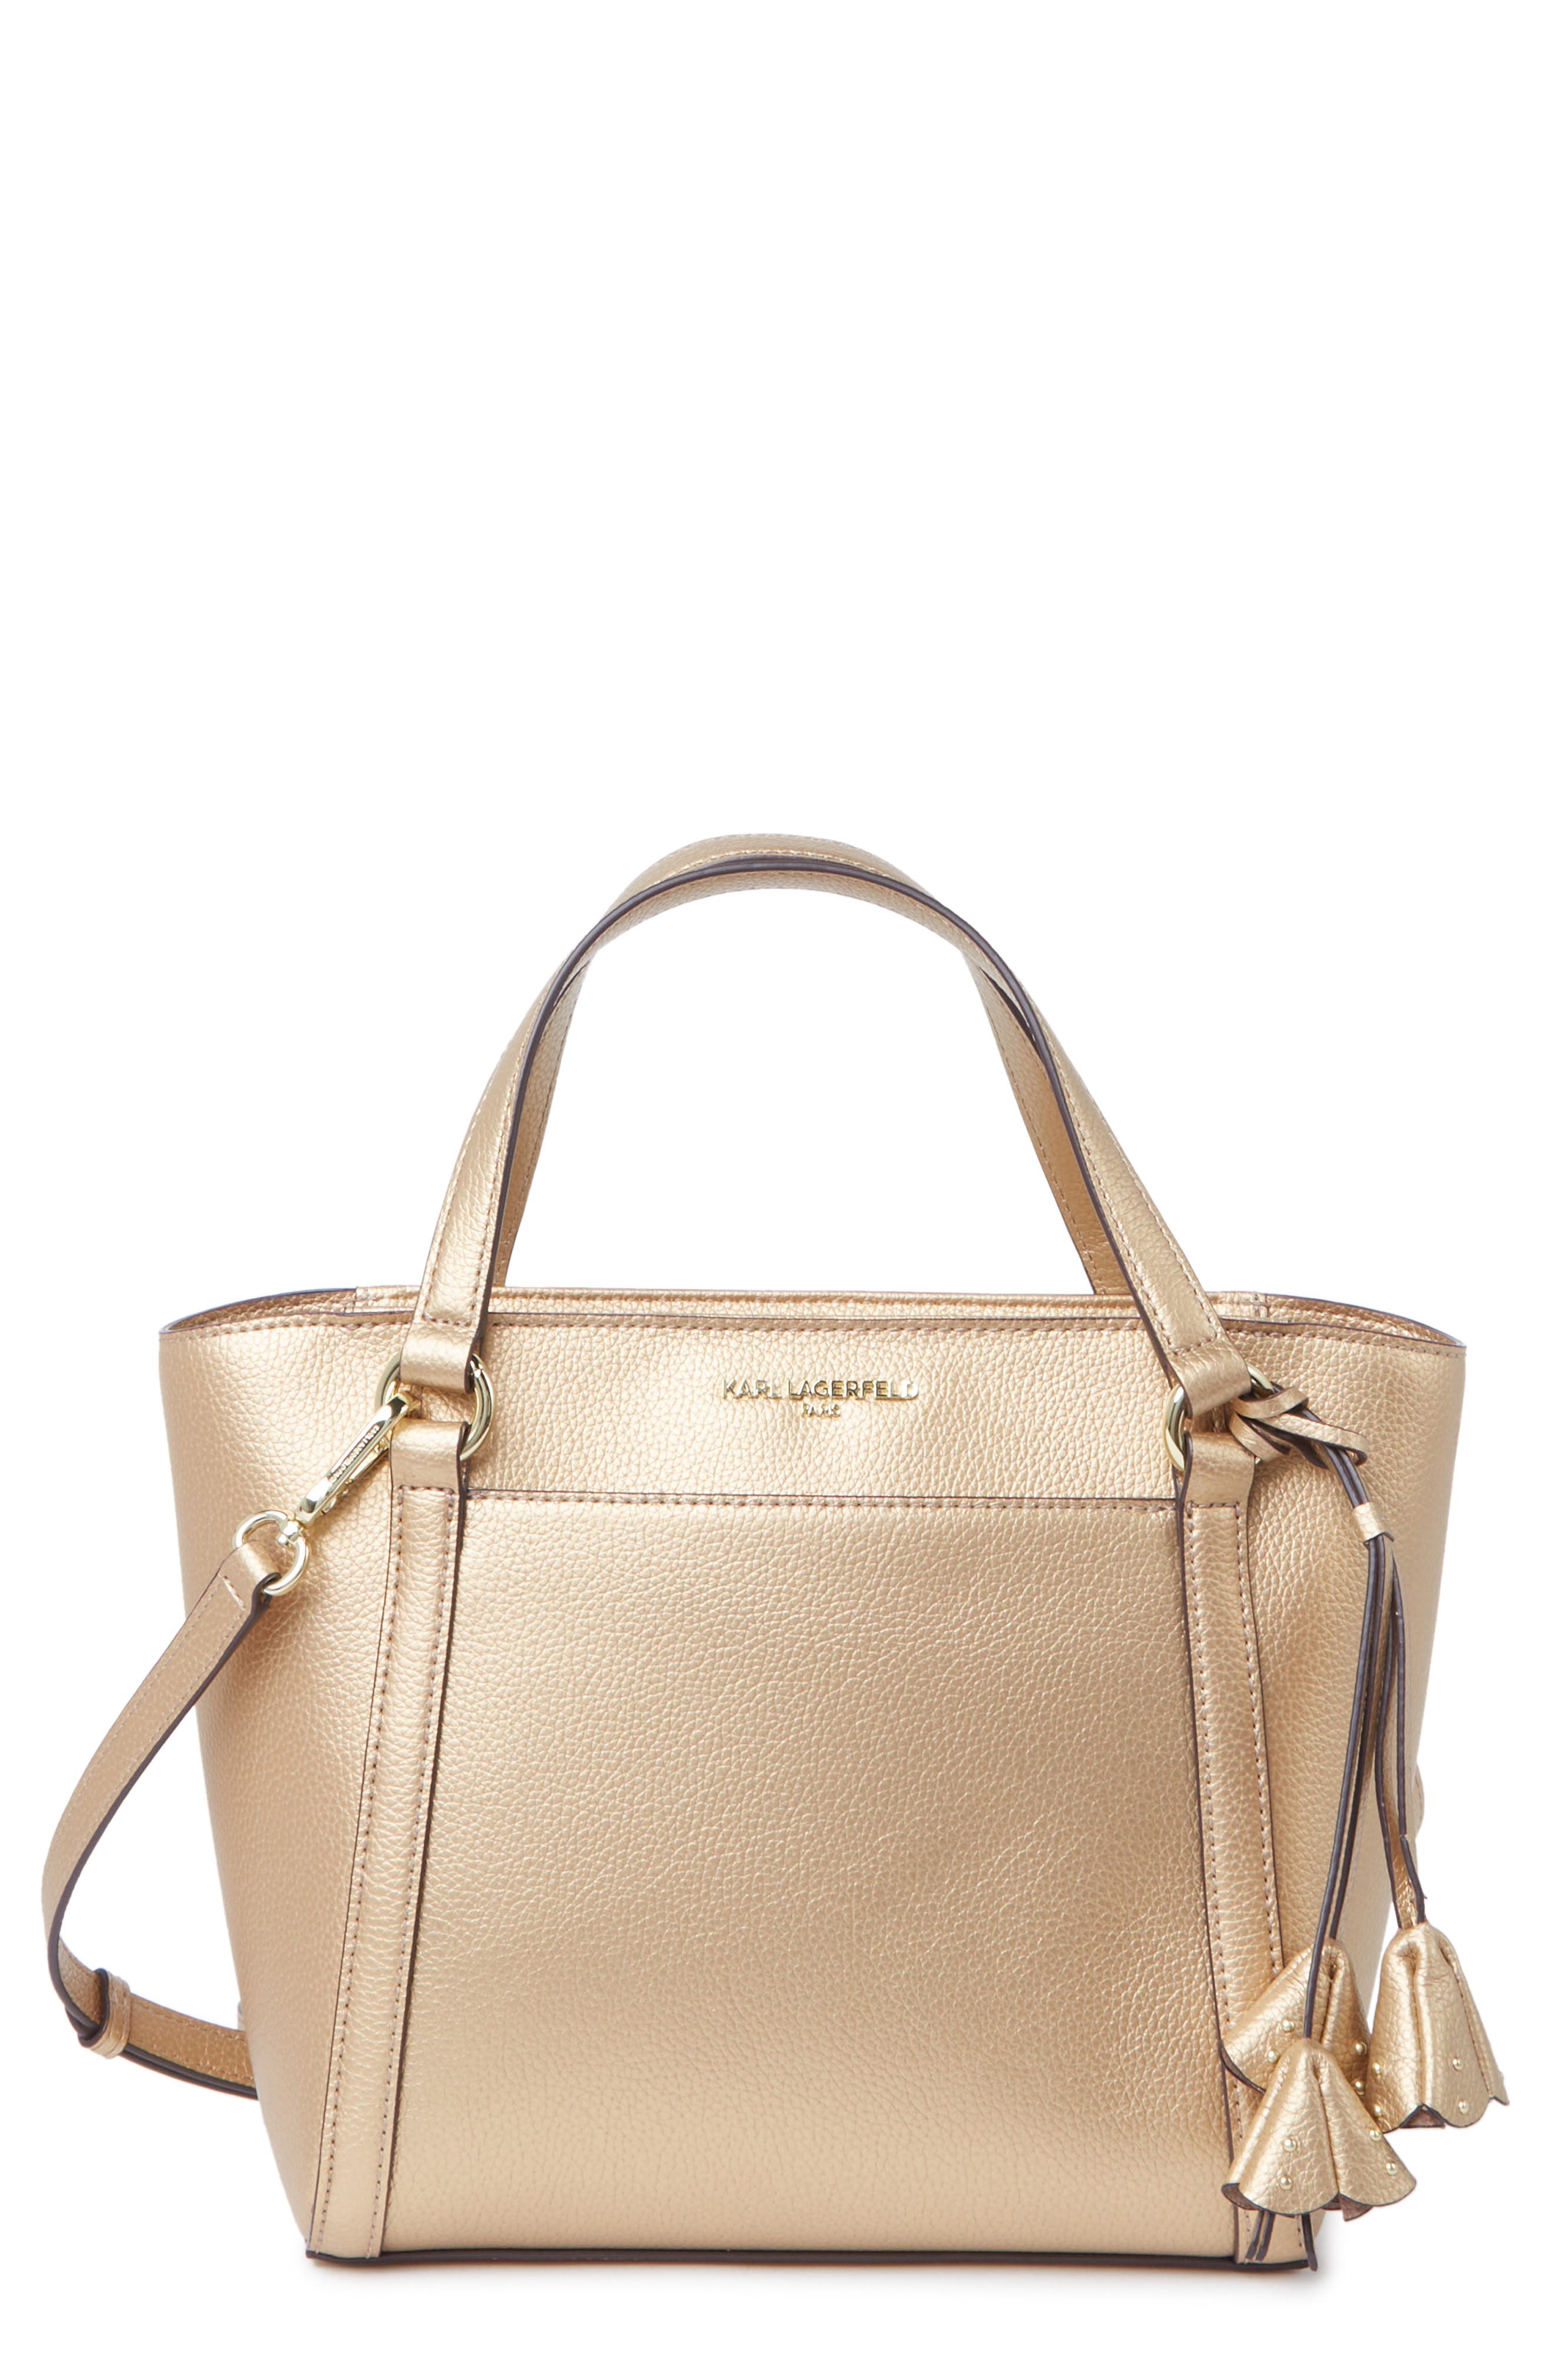 Karl Lagerfeld Iris Small Leather Satchel In Old Gold